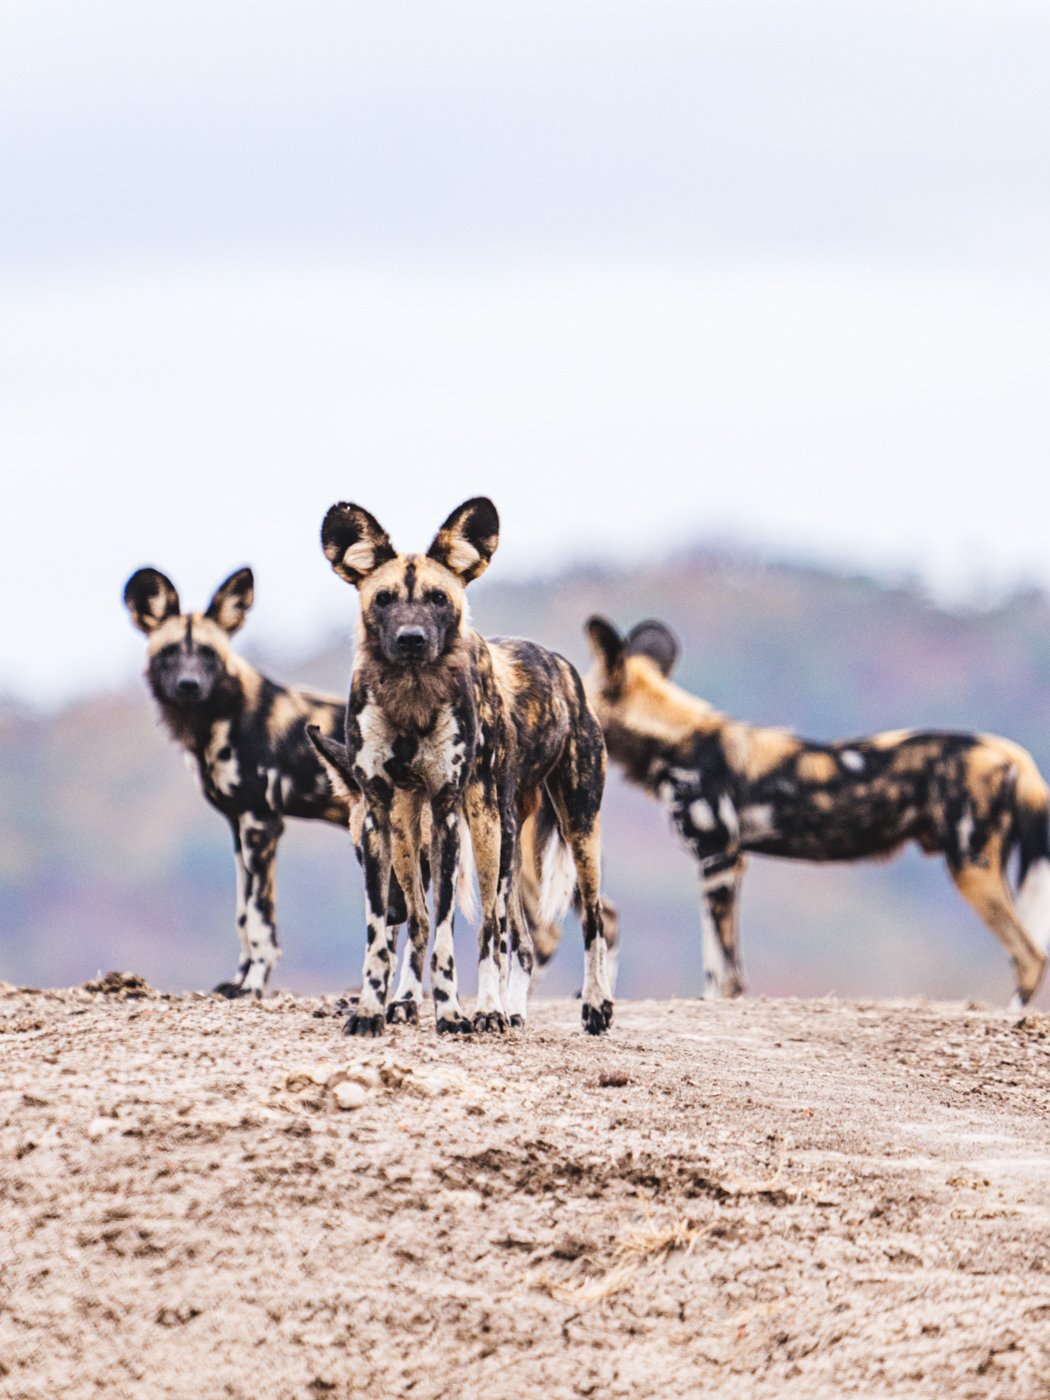 Painted dogs looking at camera